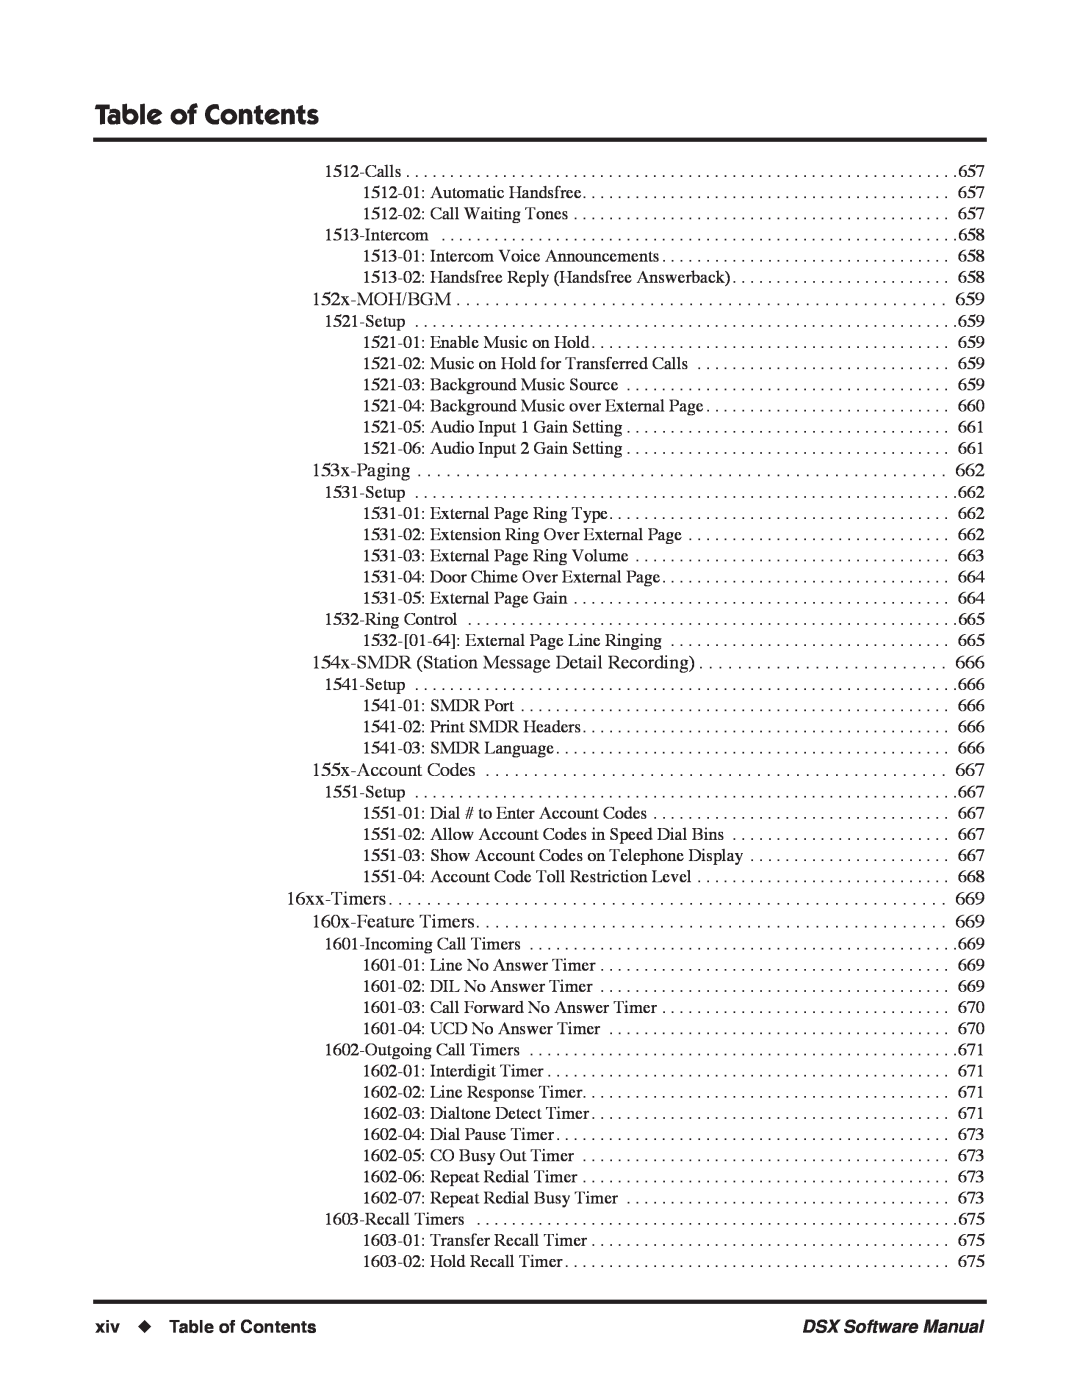 NEC N 1093100, P software manual xiv Table of Contents 